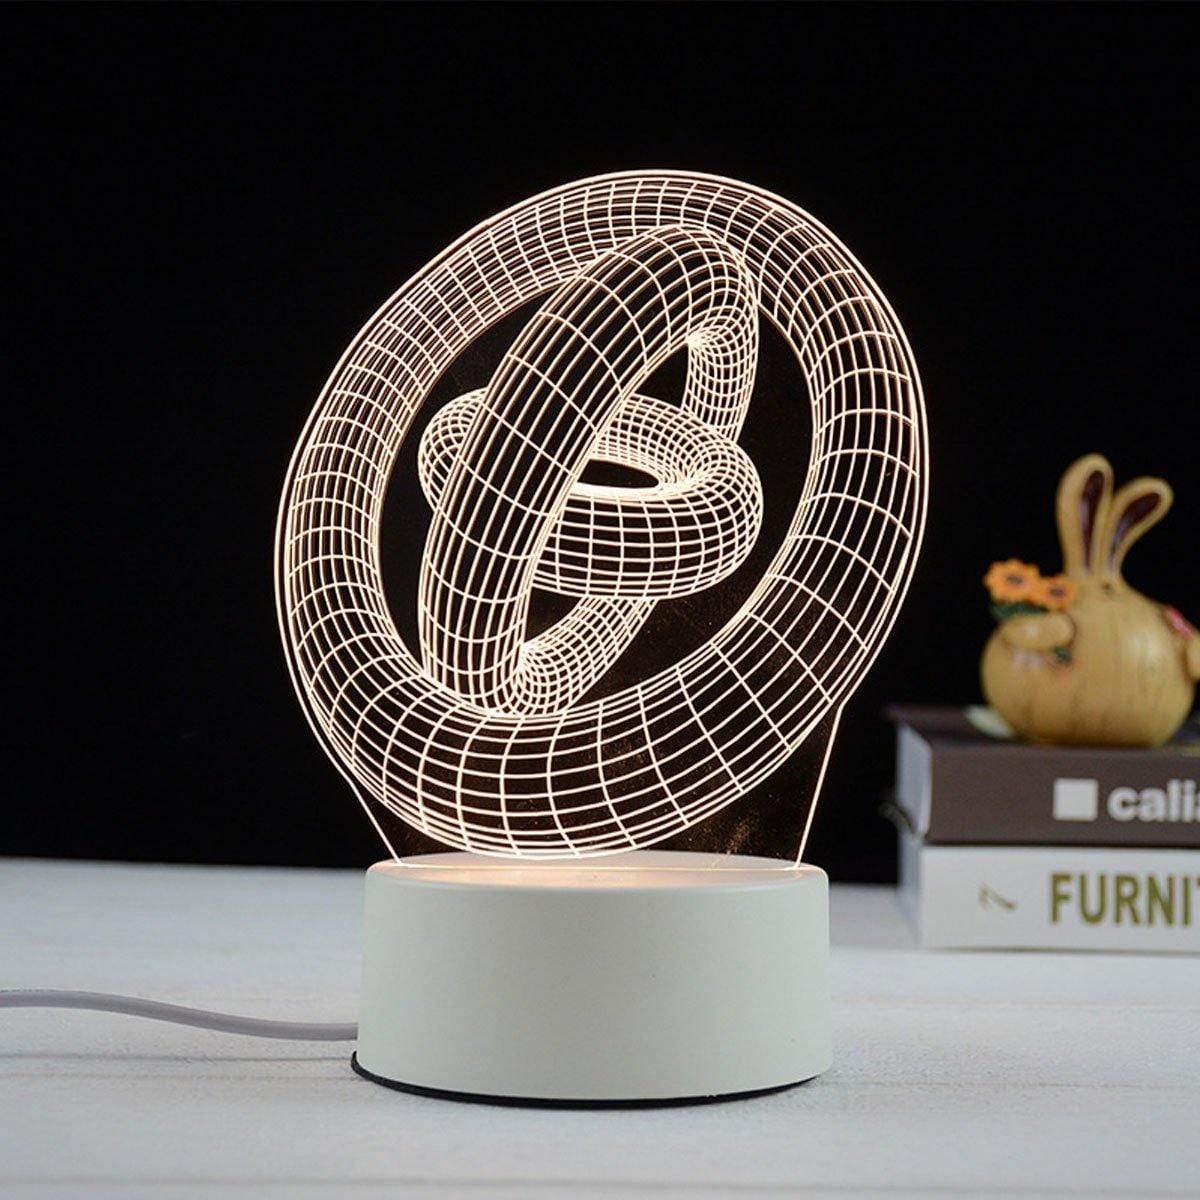 ezy2find Bedroom Child Gift A 3D LED Table Kid Night Light Lamp 16 Color USB Bedroom Child Gift Remote Control